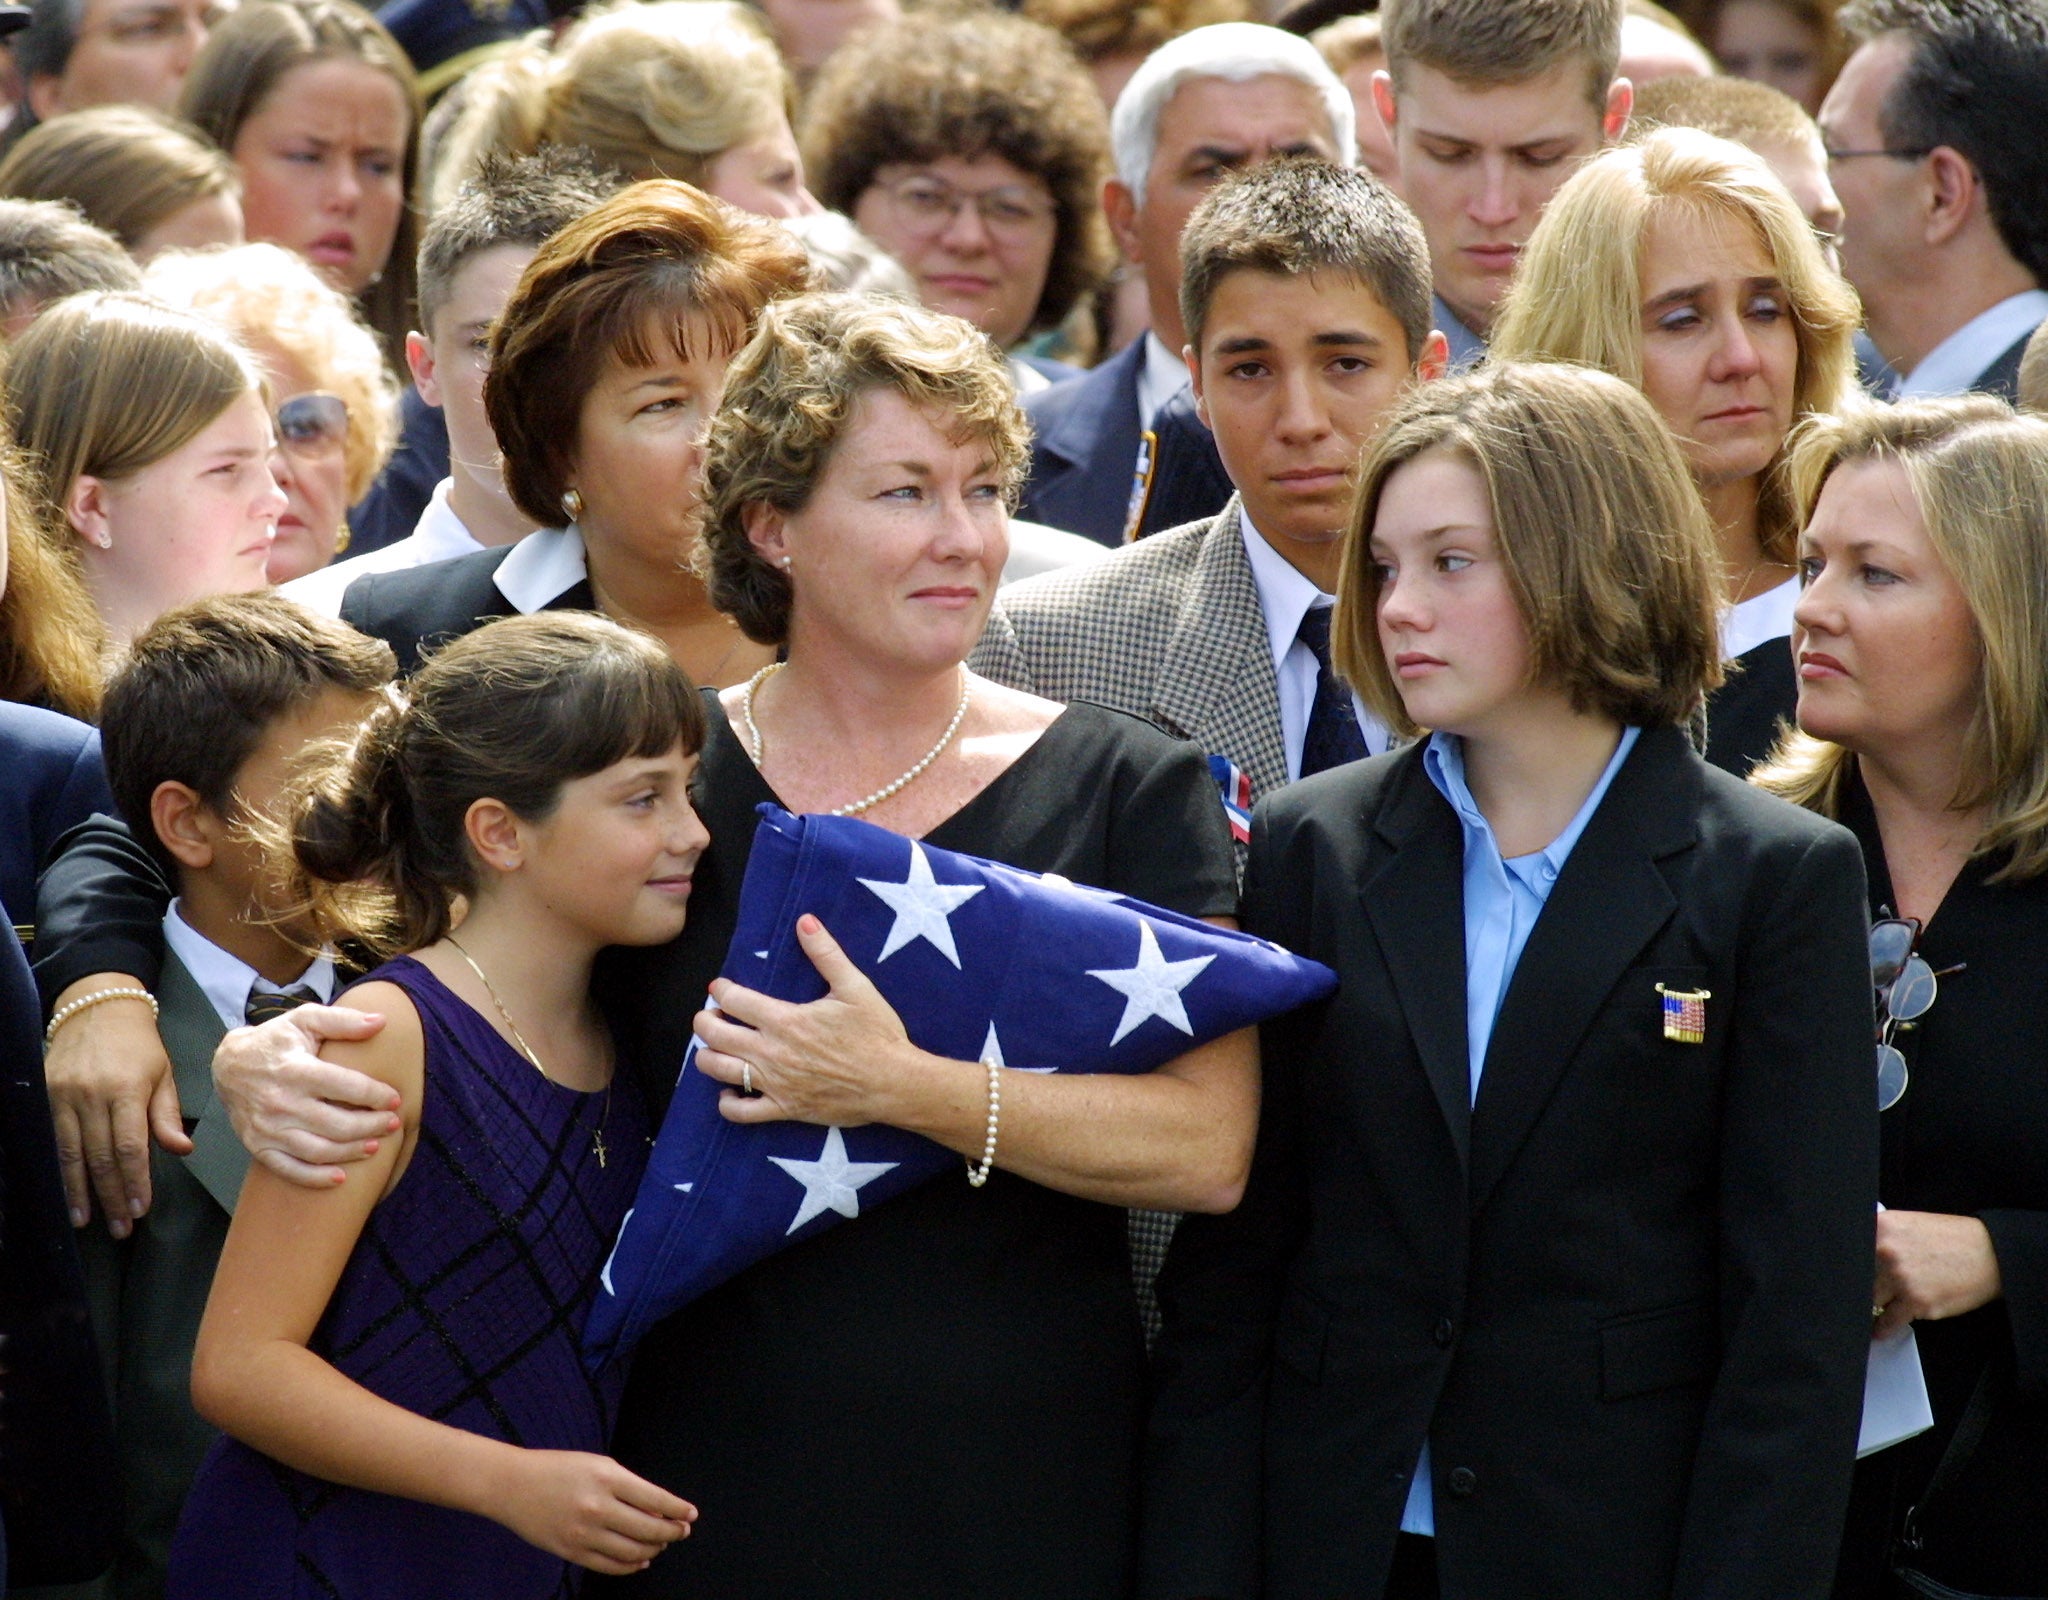 Ellen Saracini, with daughters Brielle, (L), and Kirsten, (R), in 2001 says final words to husband United Airlines pilot Victor Saracini were ‘I love you’